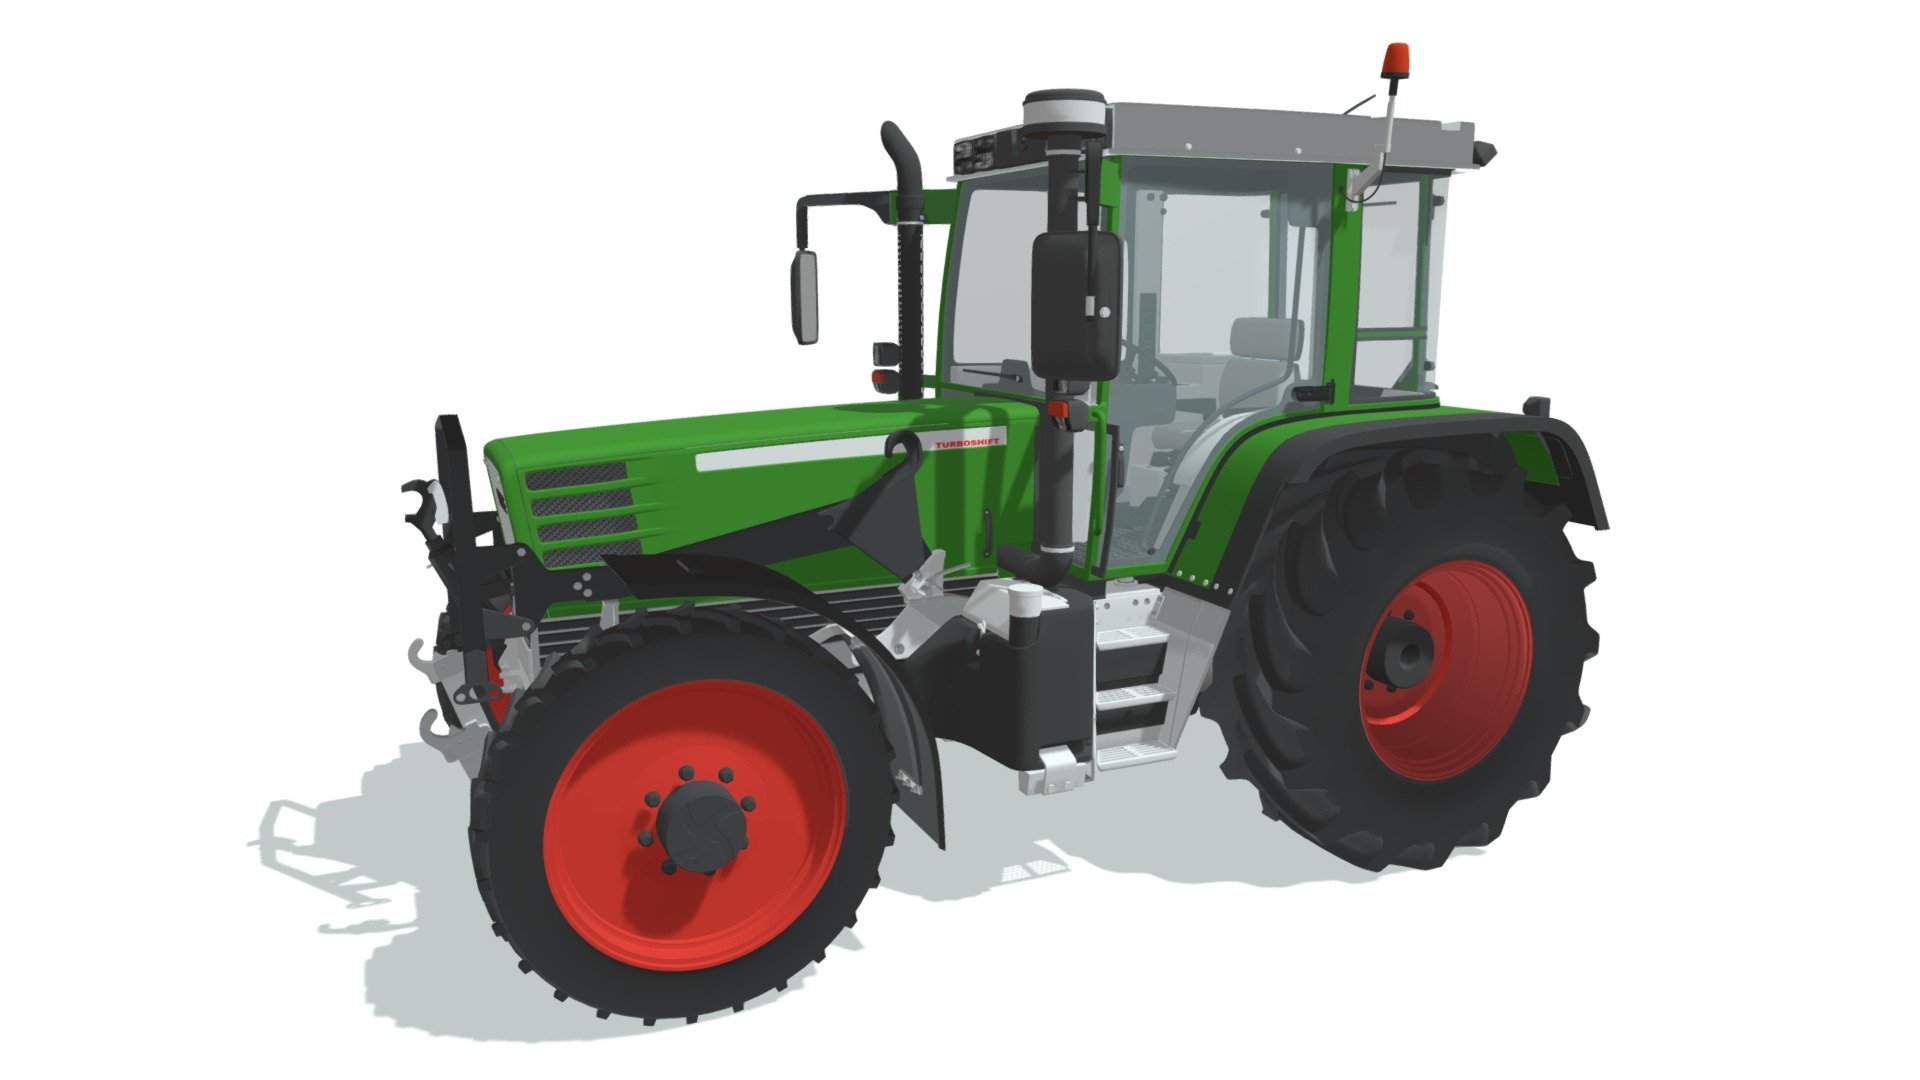 Detailed 3d model of tractor.
Model is high resolution and perfect for close-up detailed renders.
Semi interior details 3d model